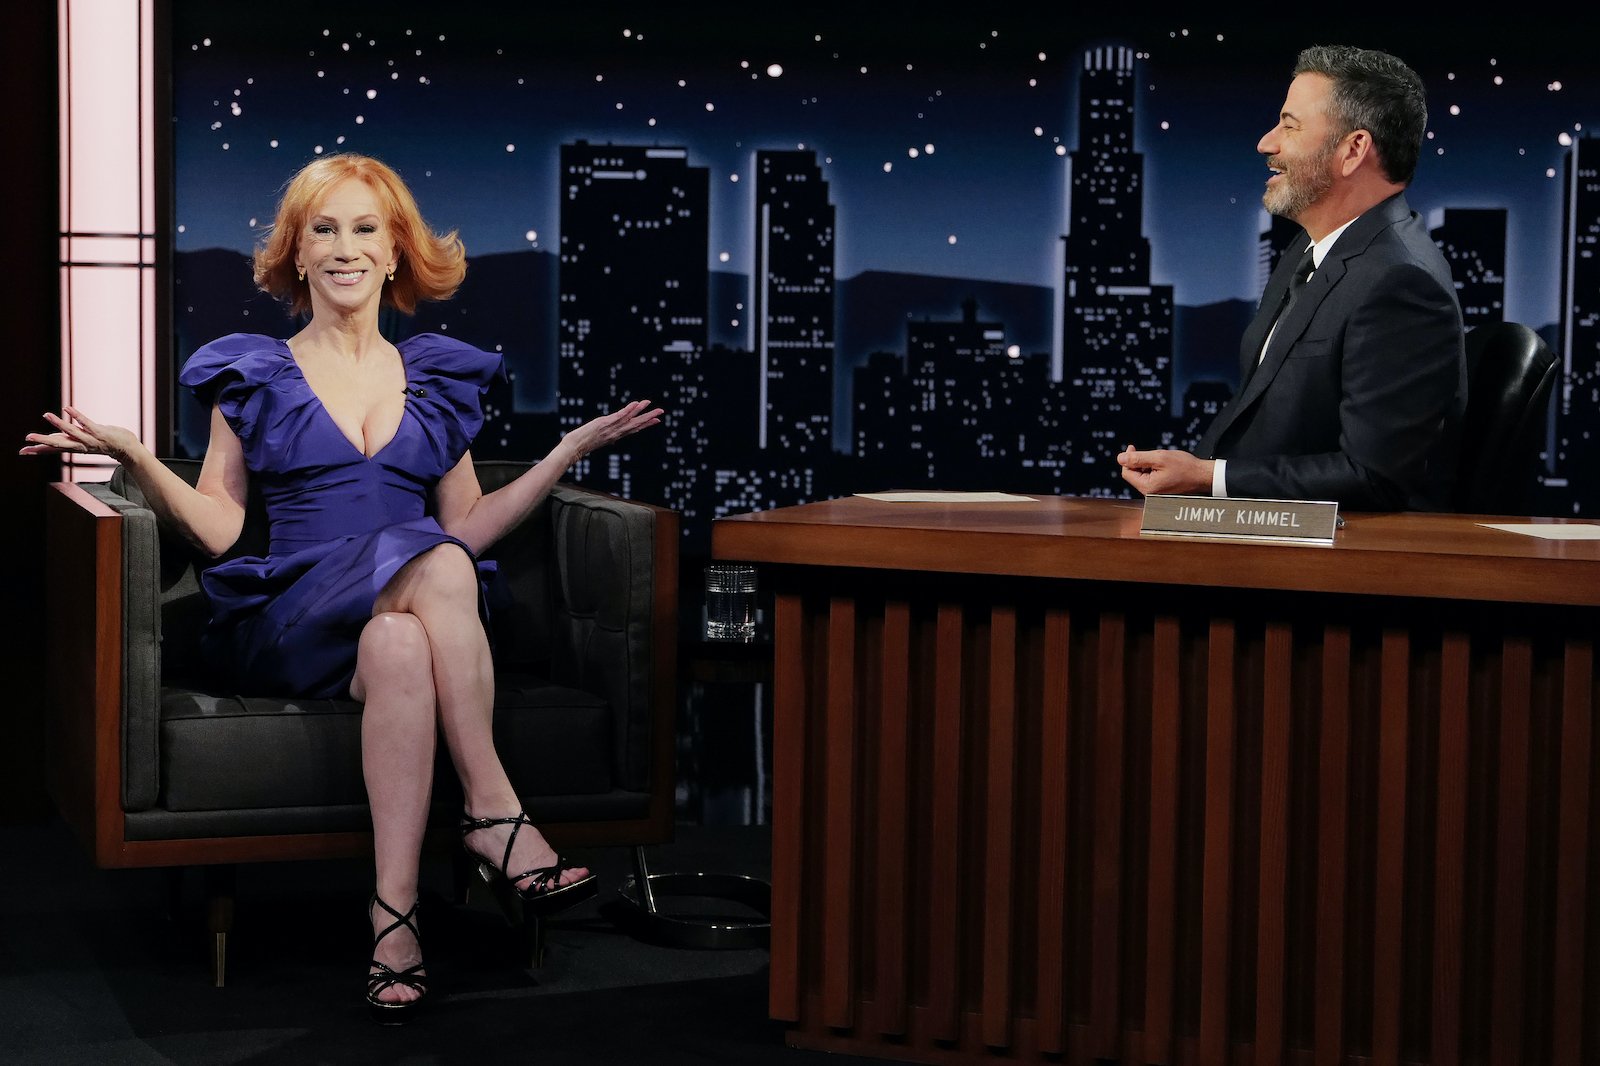 Kathy Griffin sits in front of Jimmy Kimmel during an appearance on his show